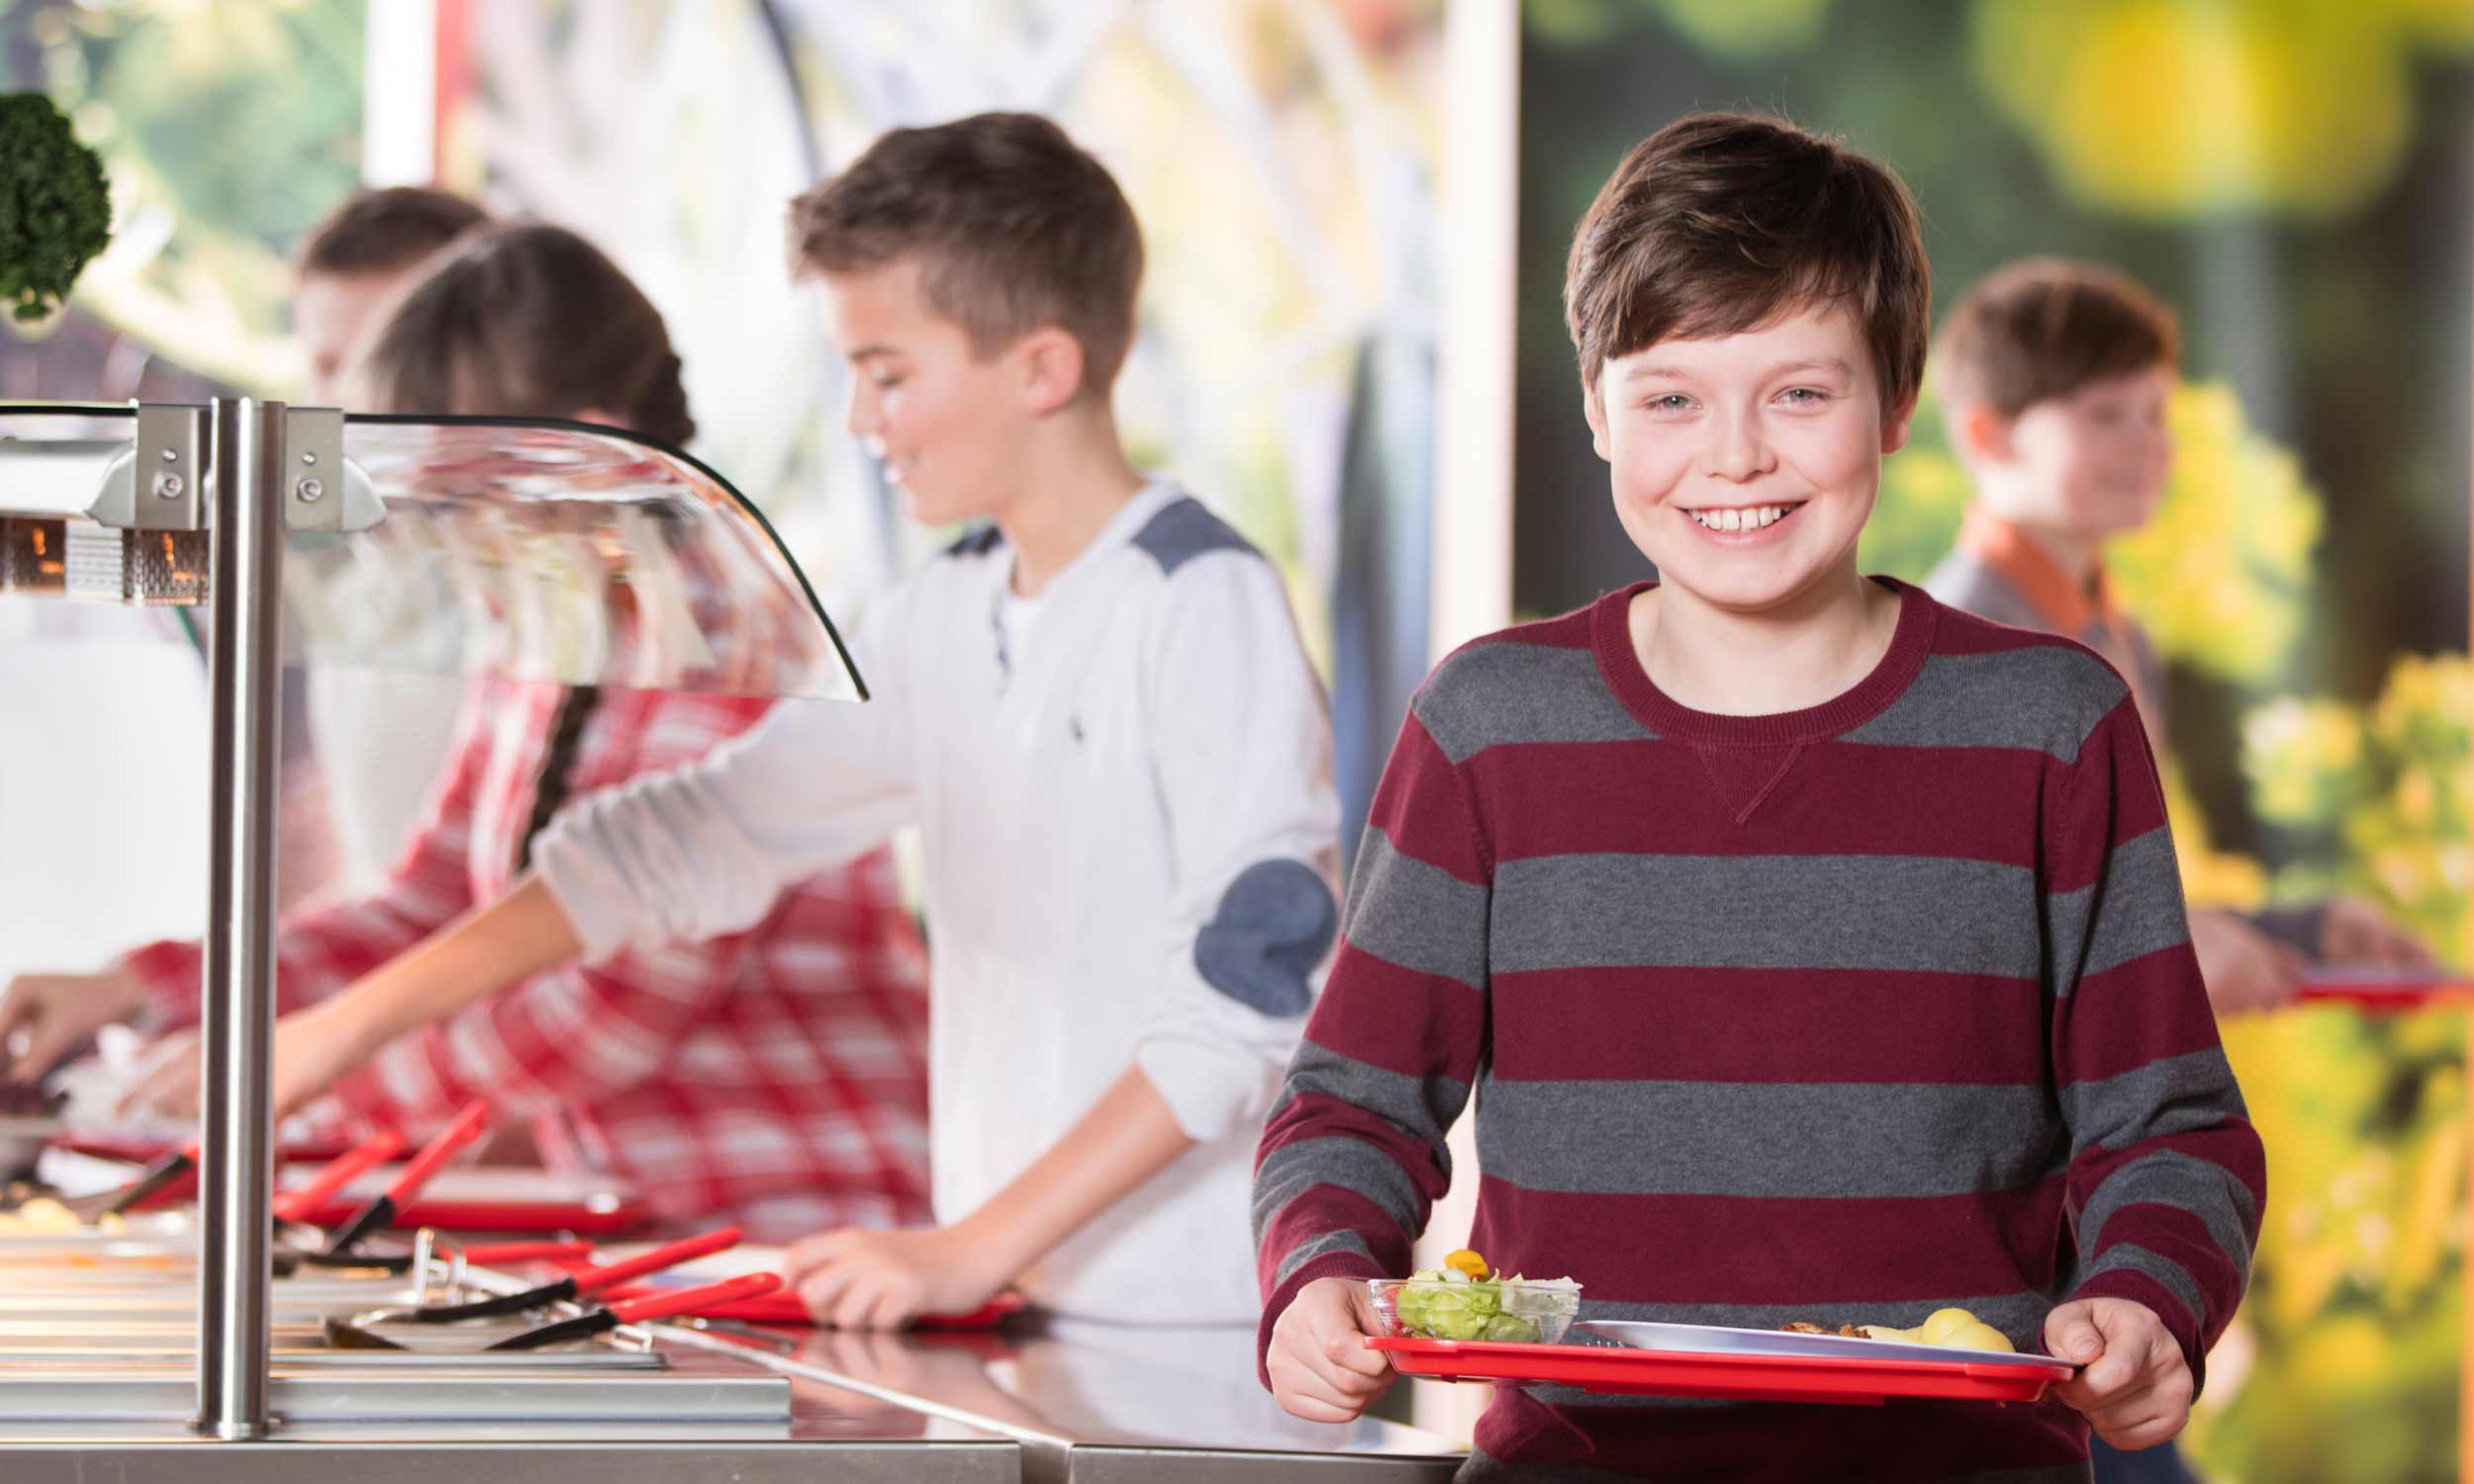 Photo of a boy with lunch on a tray that he has just put together at a self-service counter